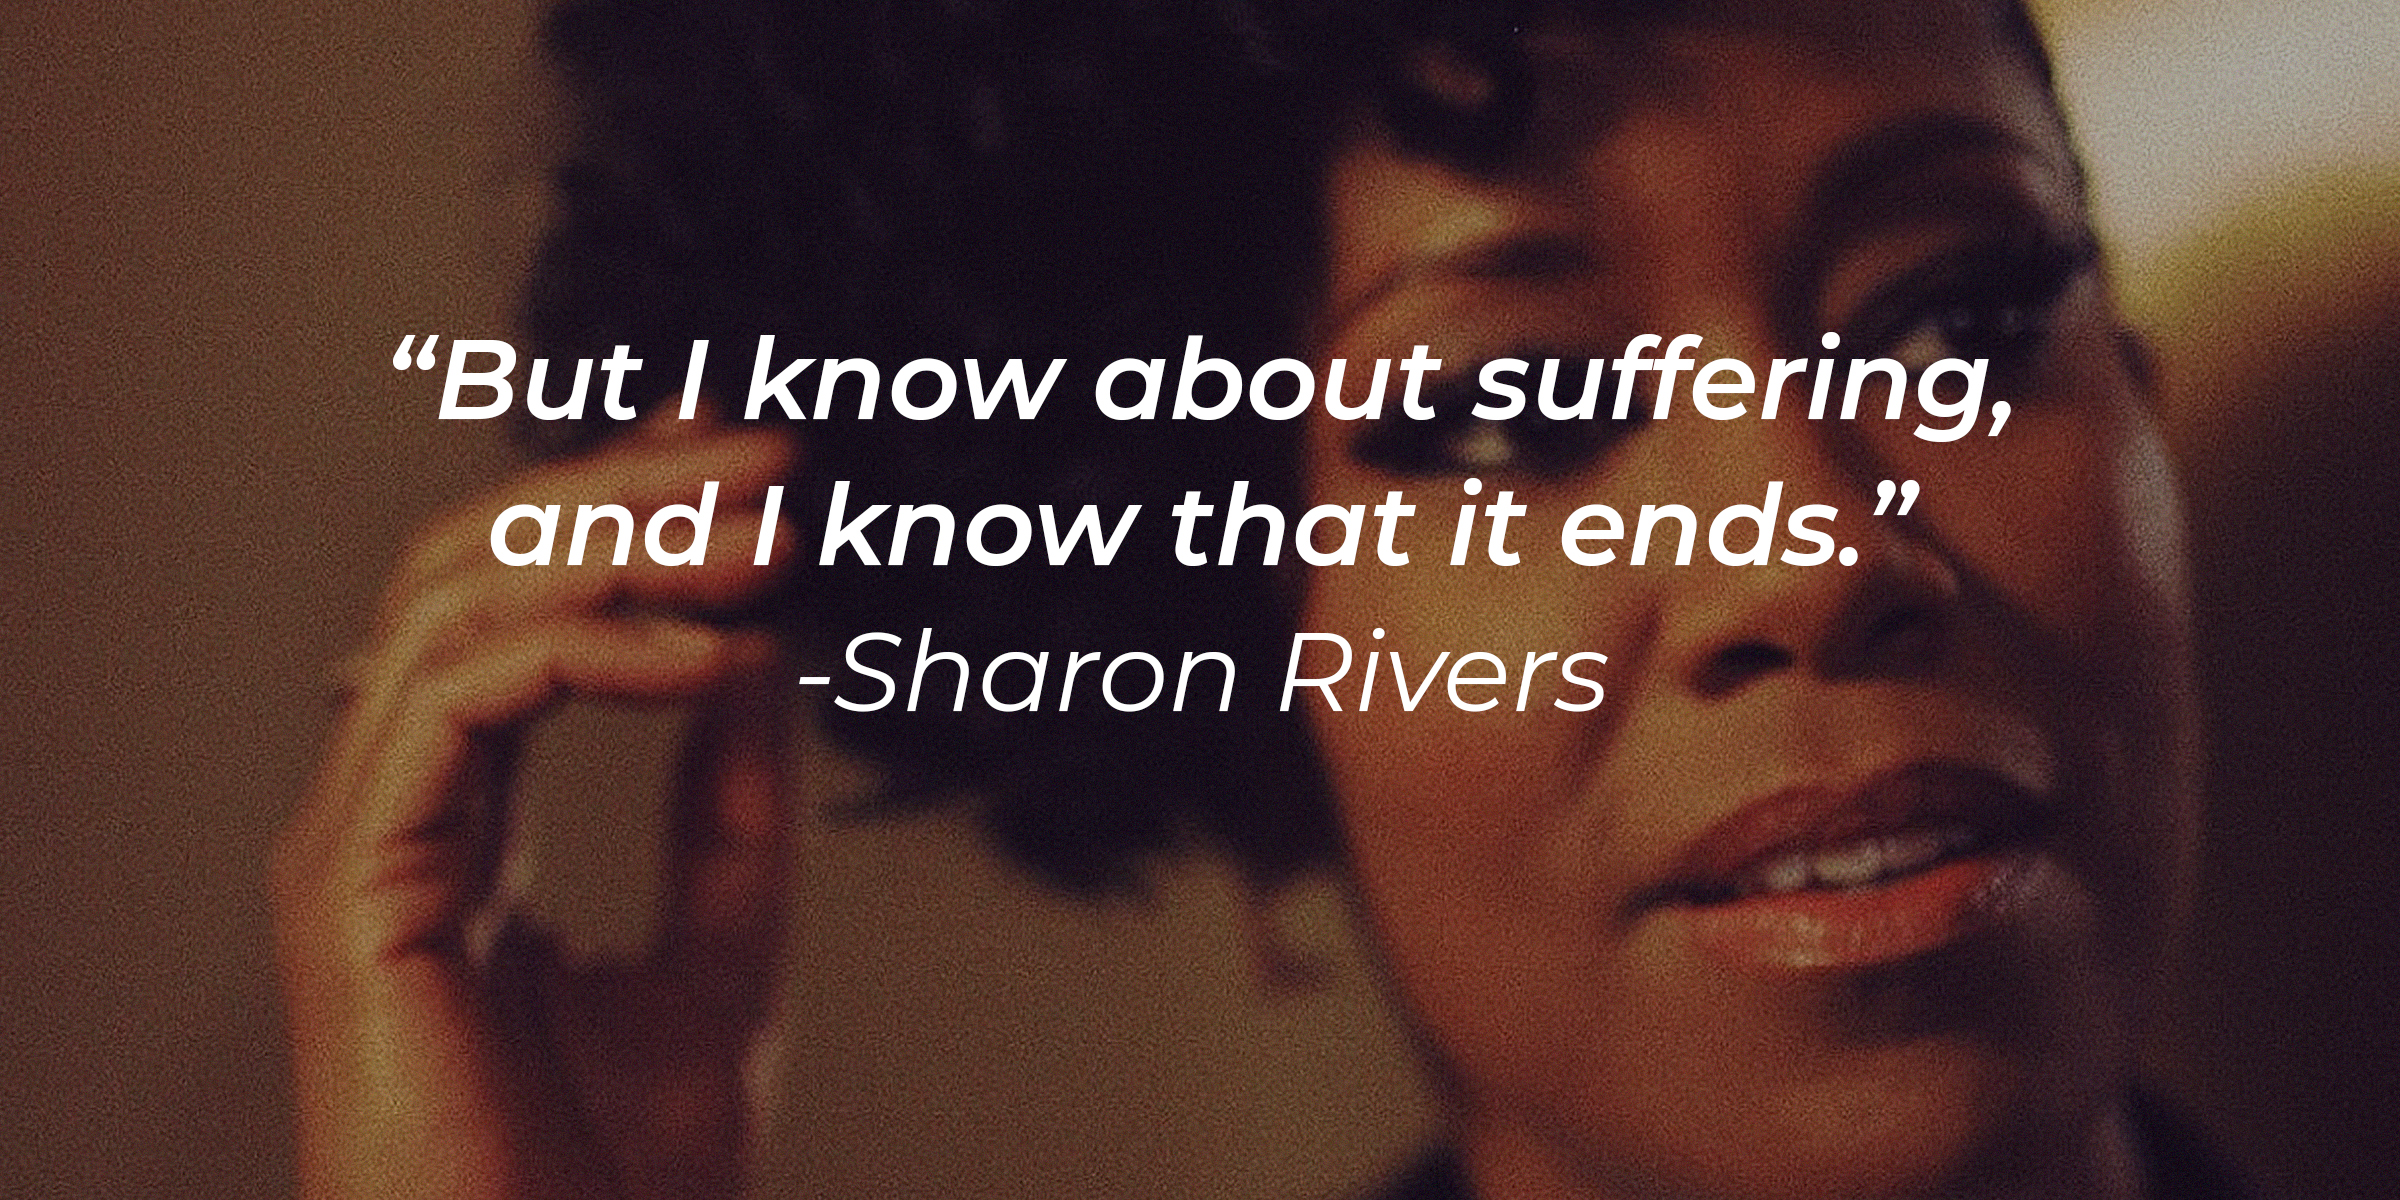 A photo of Sharon Rivers with Sharon Rivers quote: "But I know about suffering, and I know that it ends." | Source: facebook.com/BealeStreet